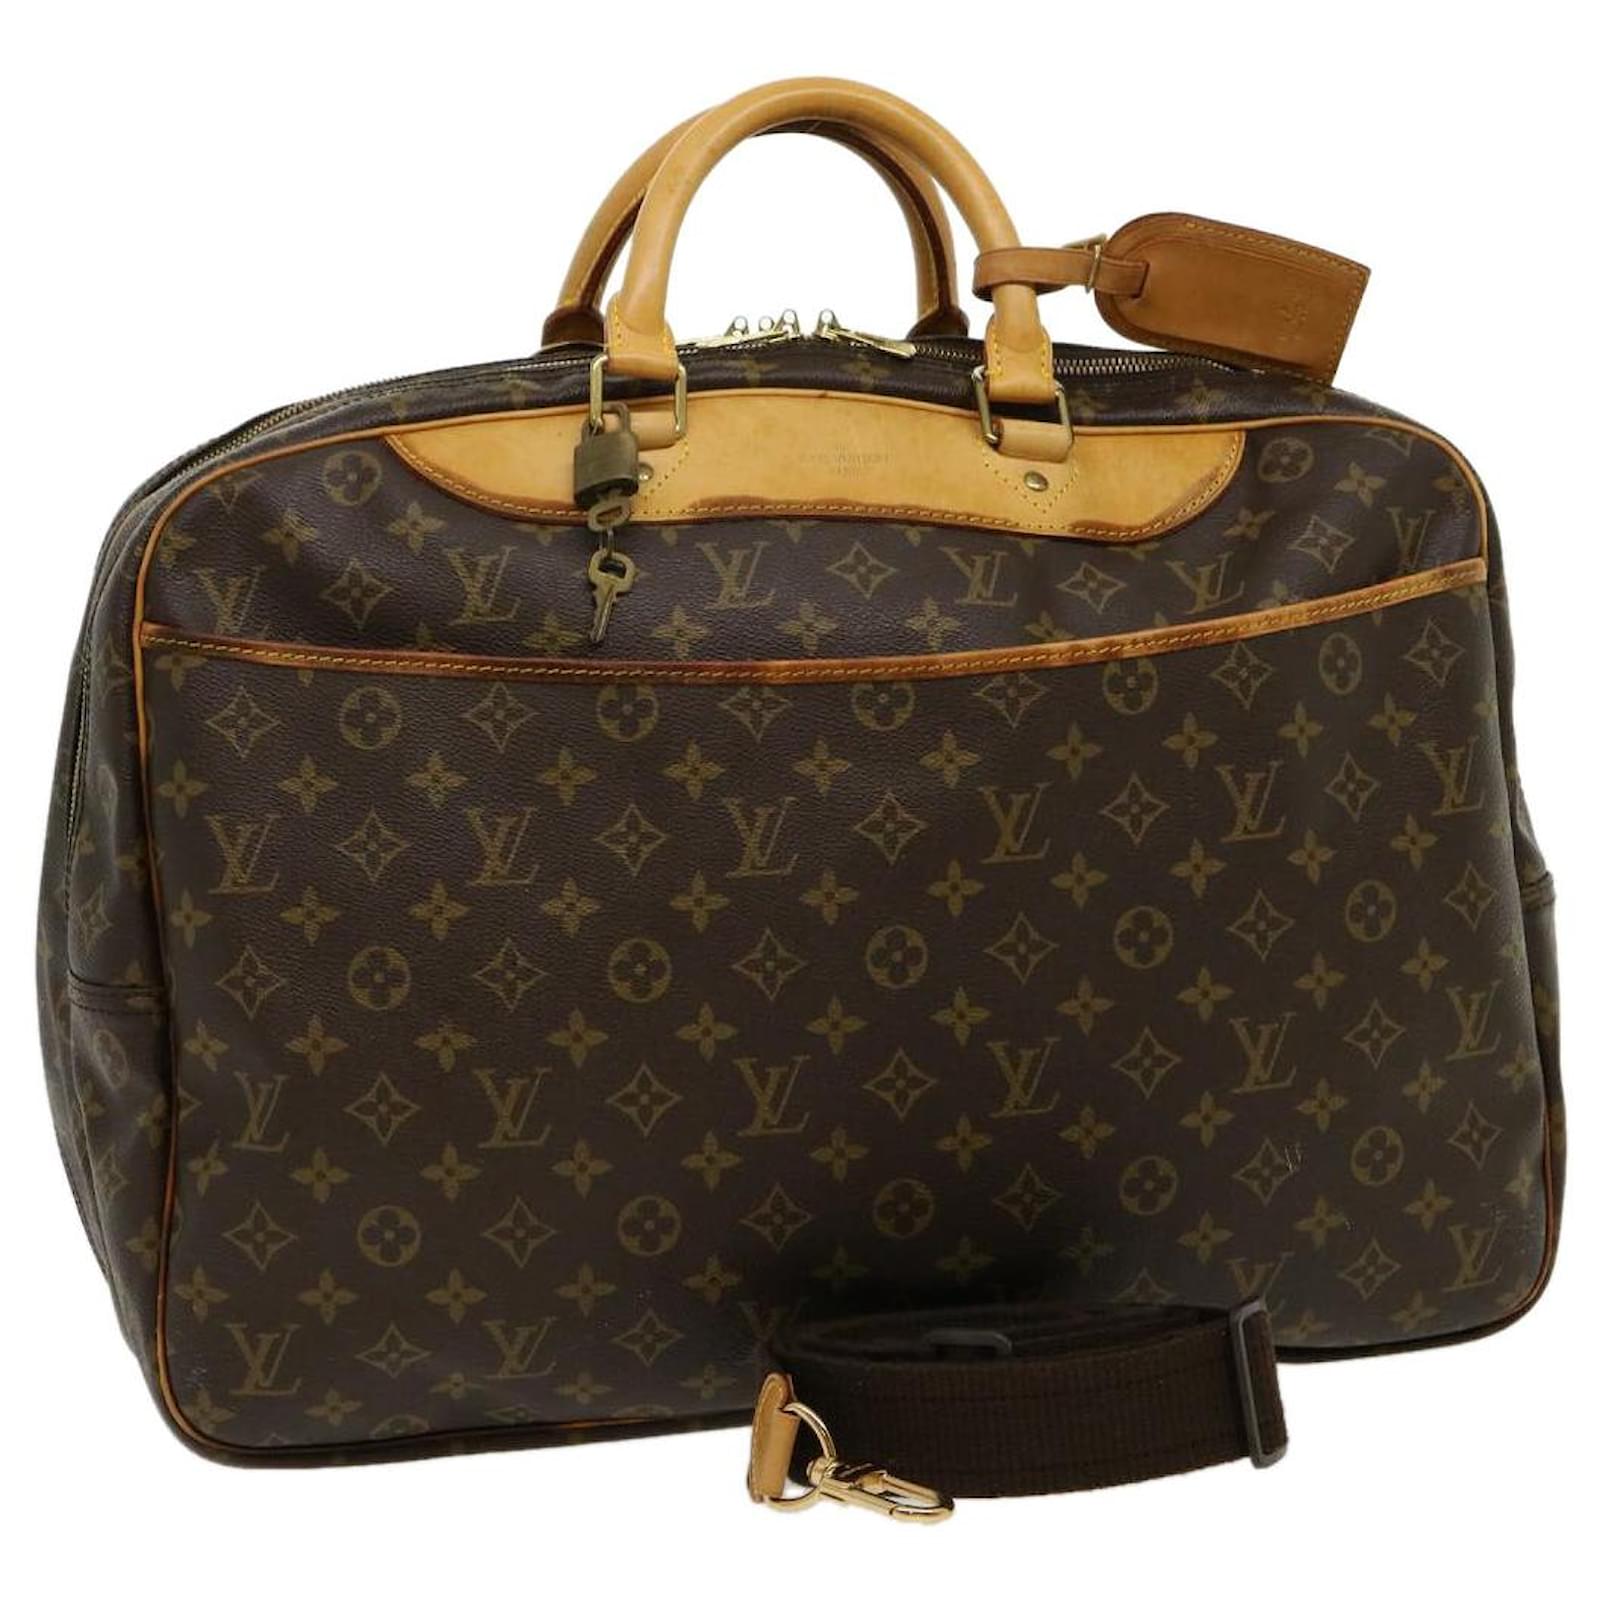 Louis Vuitton Logo Deauville Hand Bag Monogram Leather Brown Duffle Luggage  Tag